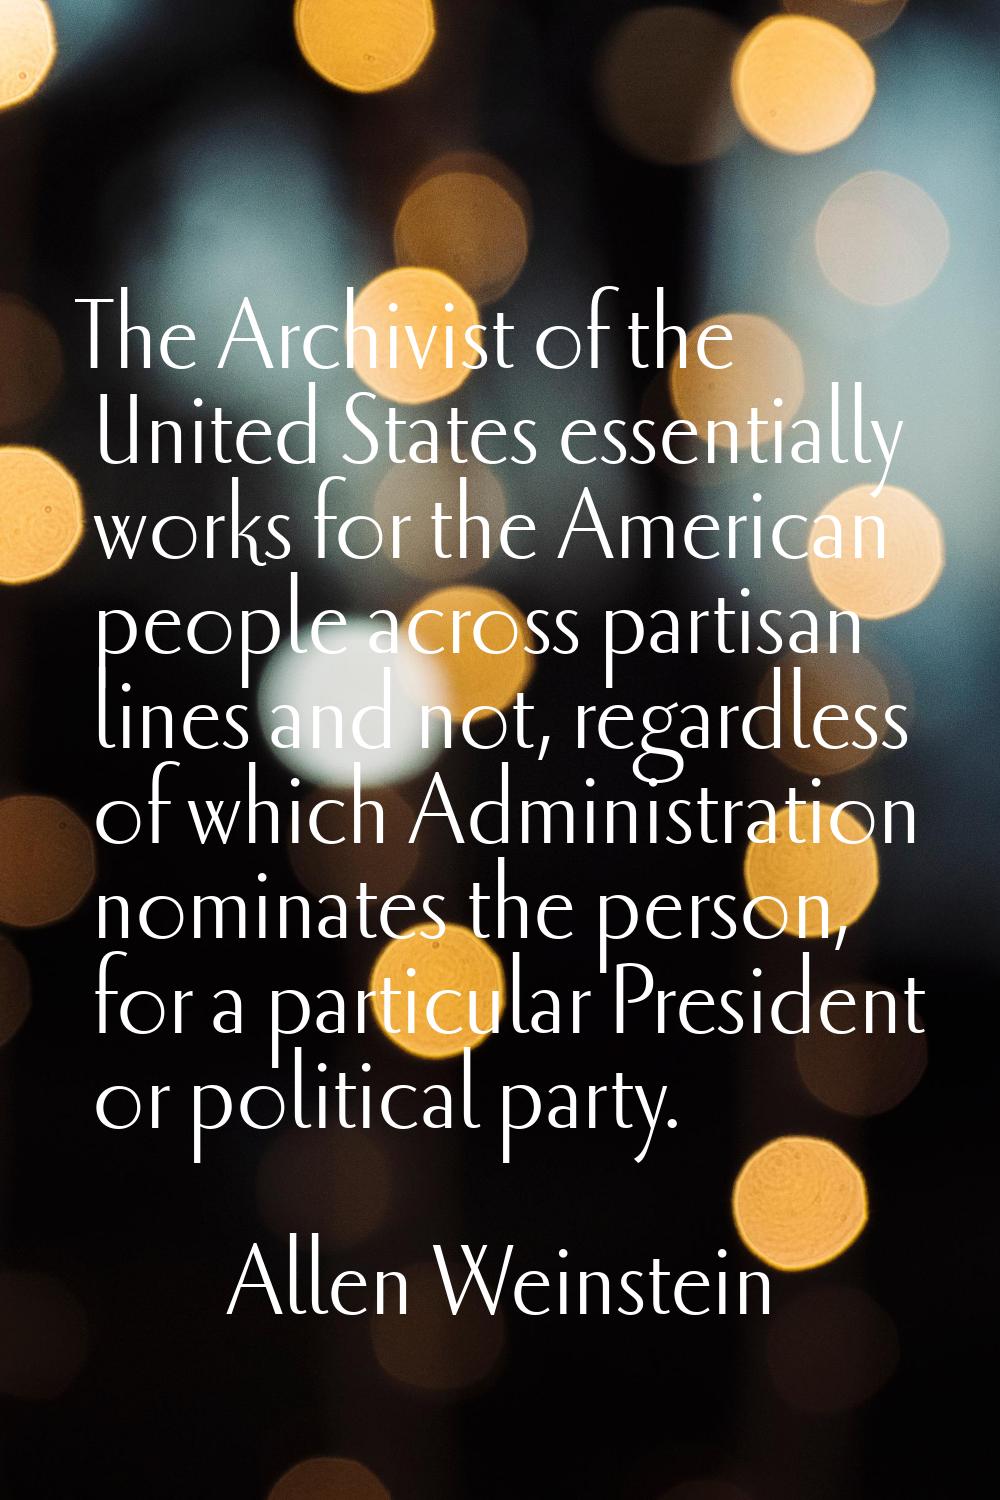 The Archivist of the United States essentially works for the American people across partisan lines 